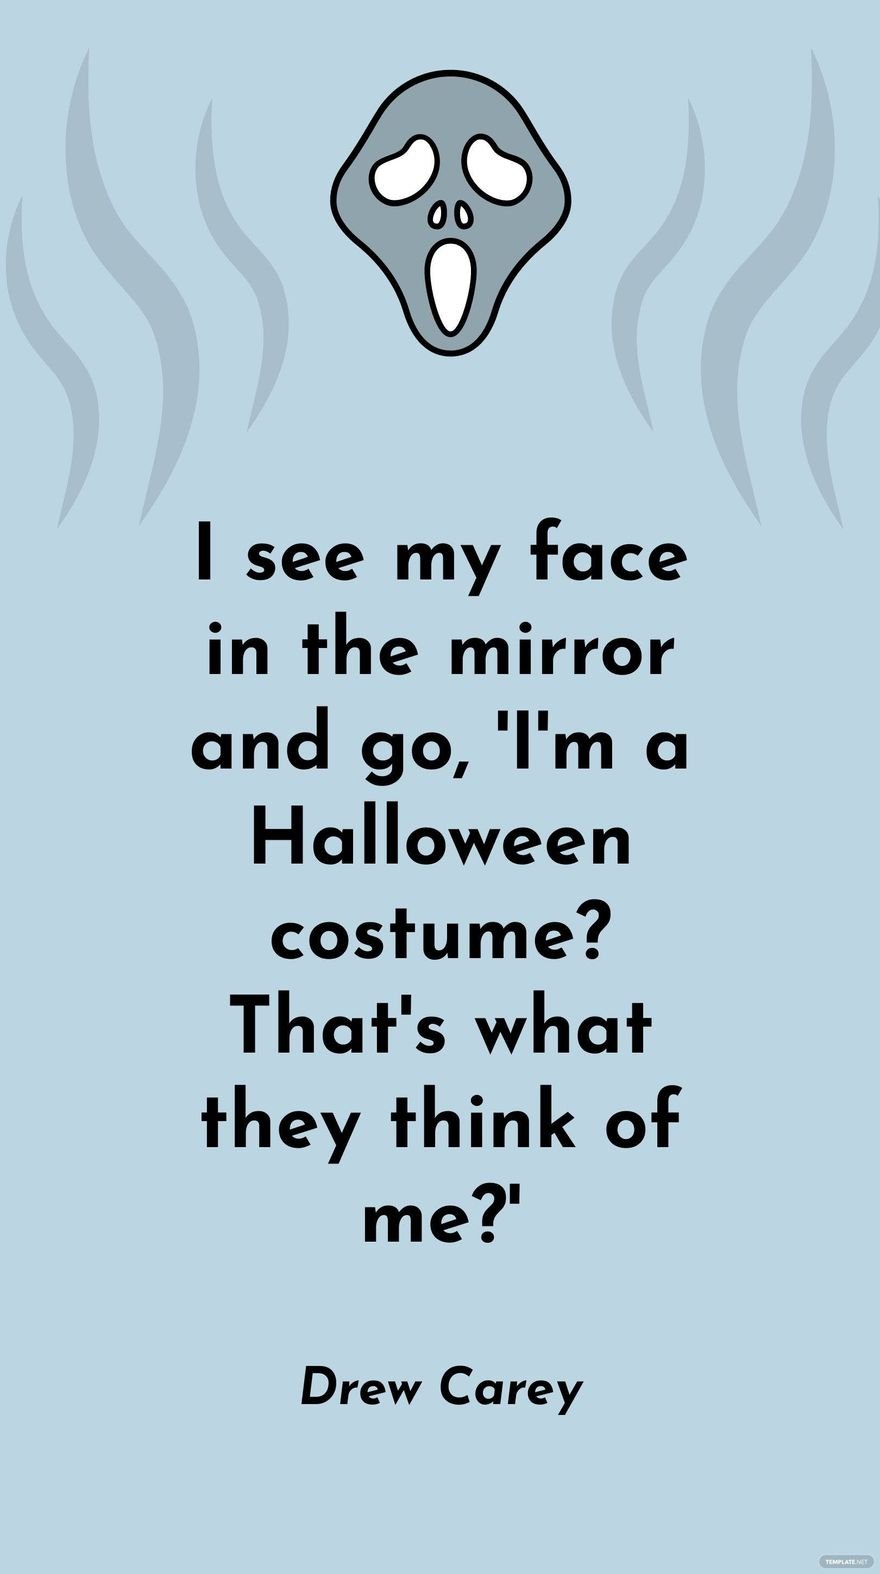 Free Drew Carey - I see my face in the mirror and go, 'I'm a Halloween costume? That's what they think of me?' in JPG